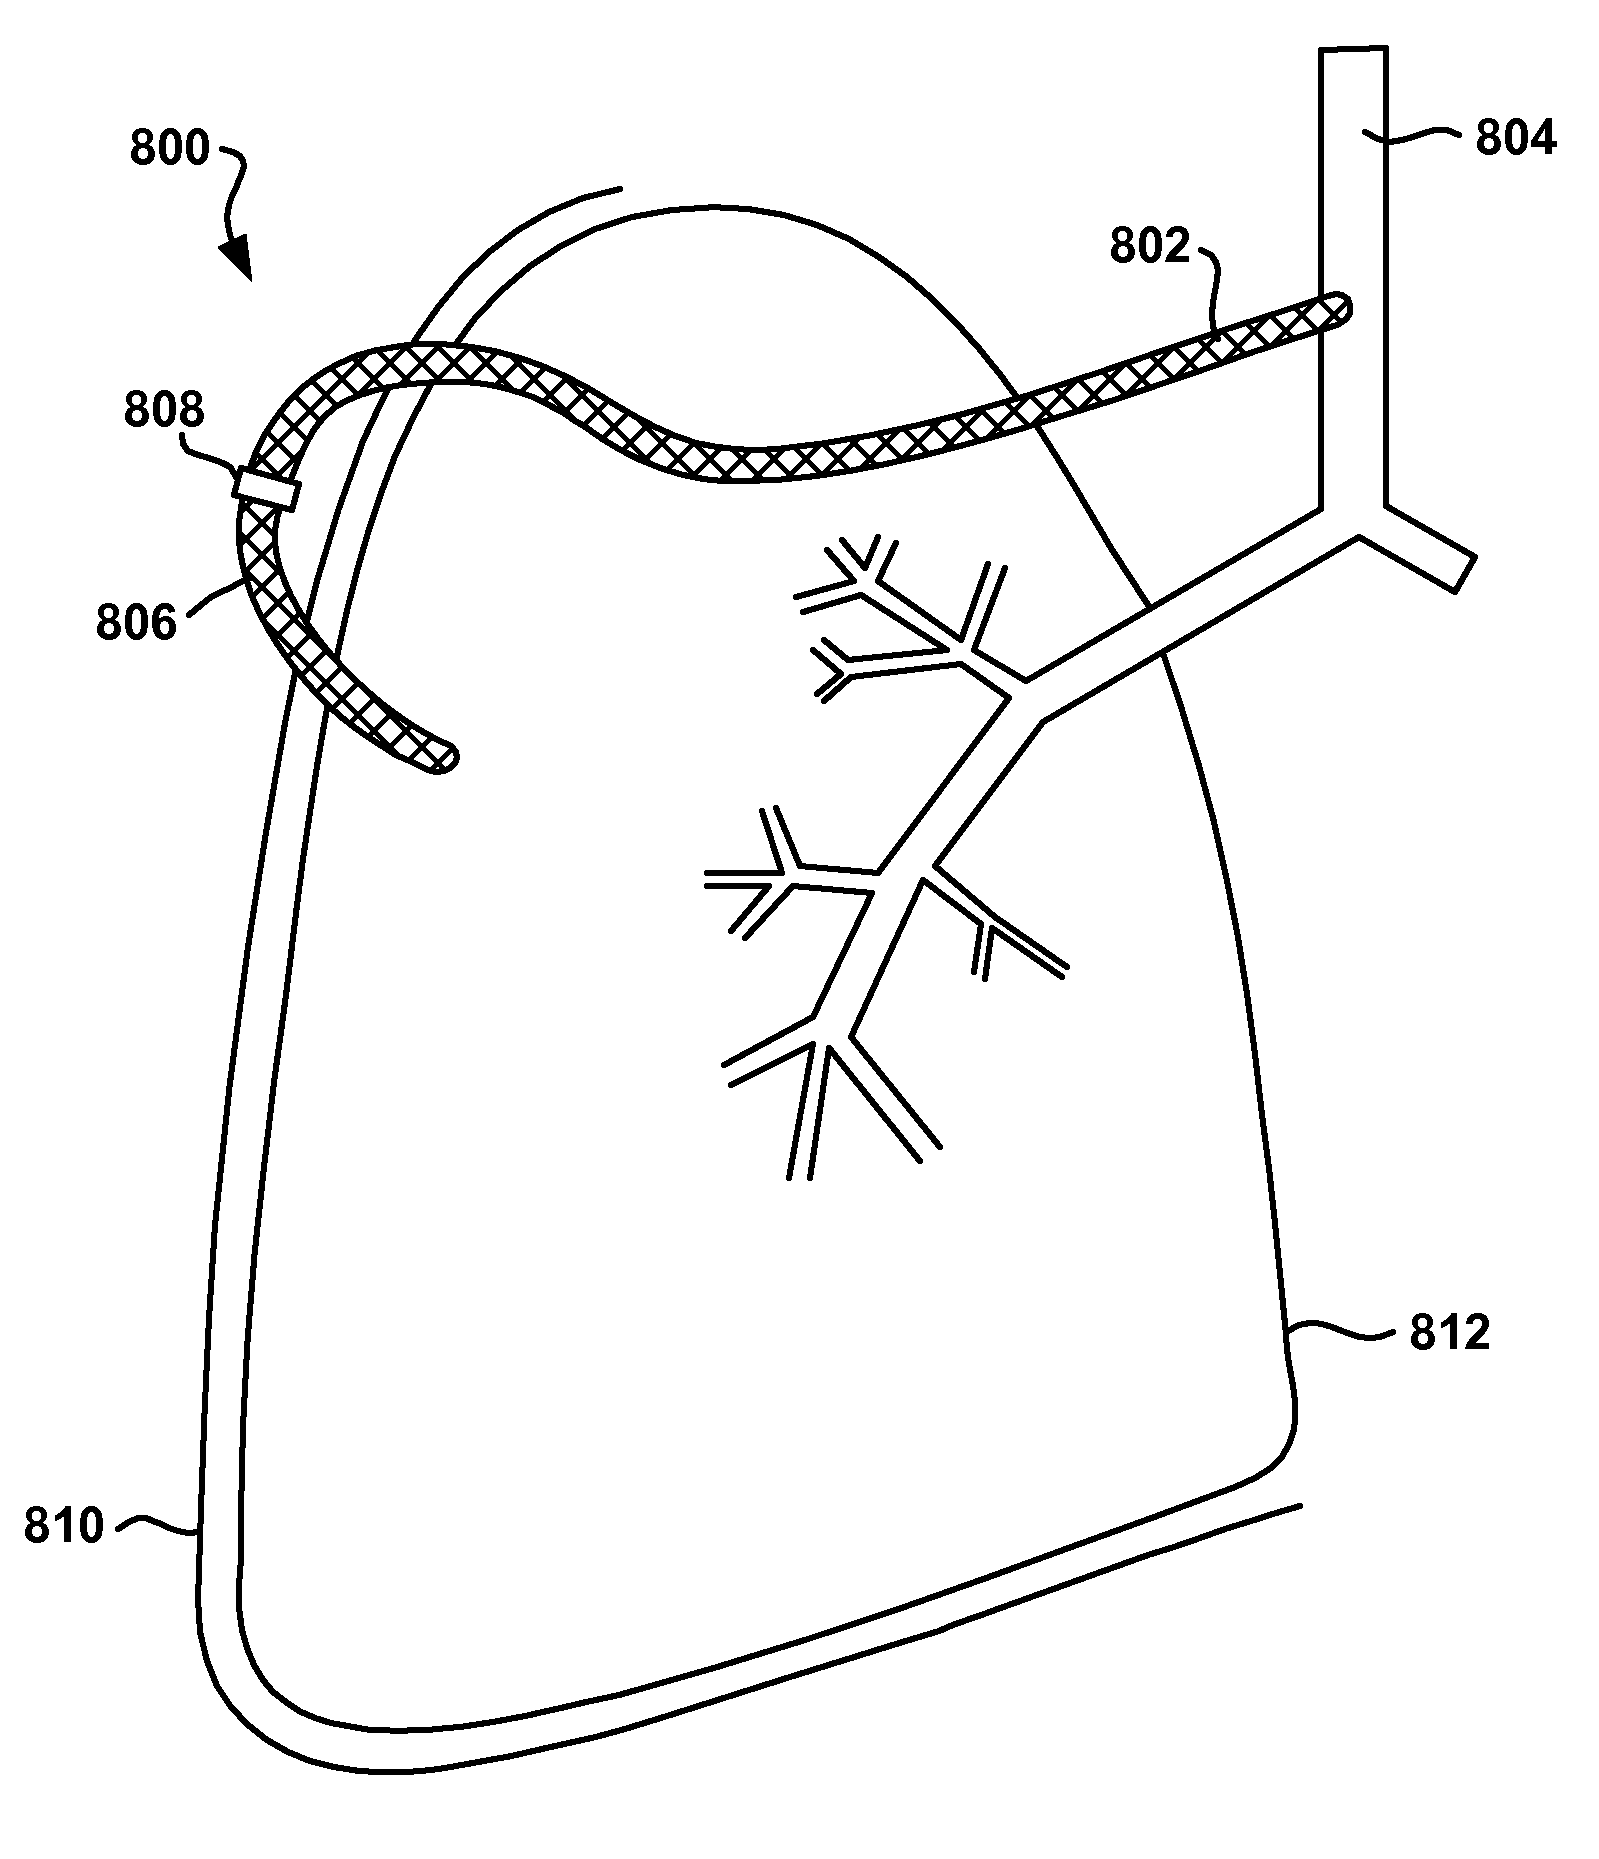 Intra/extra thoracic system for ameliorating a symptom of chronic obstructive pulmonary disease